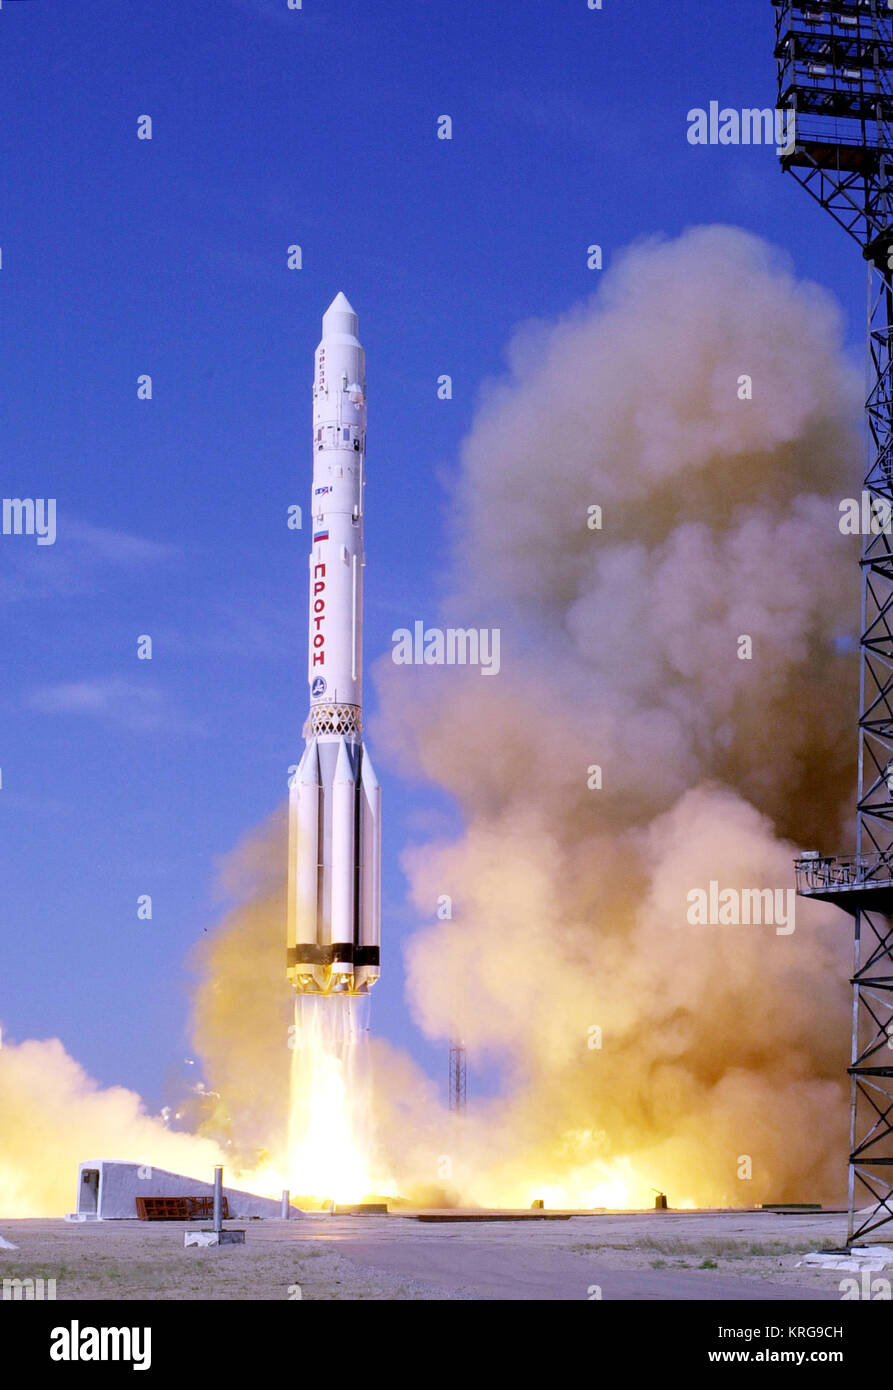 Photo credit; Scott Andrews/NASA   Caption; A proton  booster lifts off from the Bykanor Cosmodrome carrying the Zvesda, the third element of the International Space Staion   Date; 12 July, 2000 Proton Zvezda Stock Photo